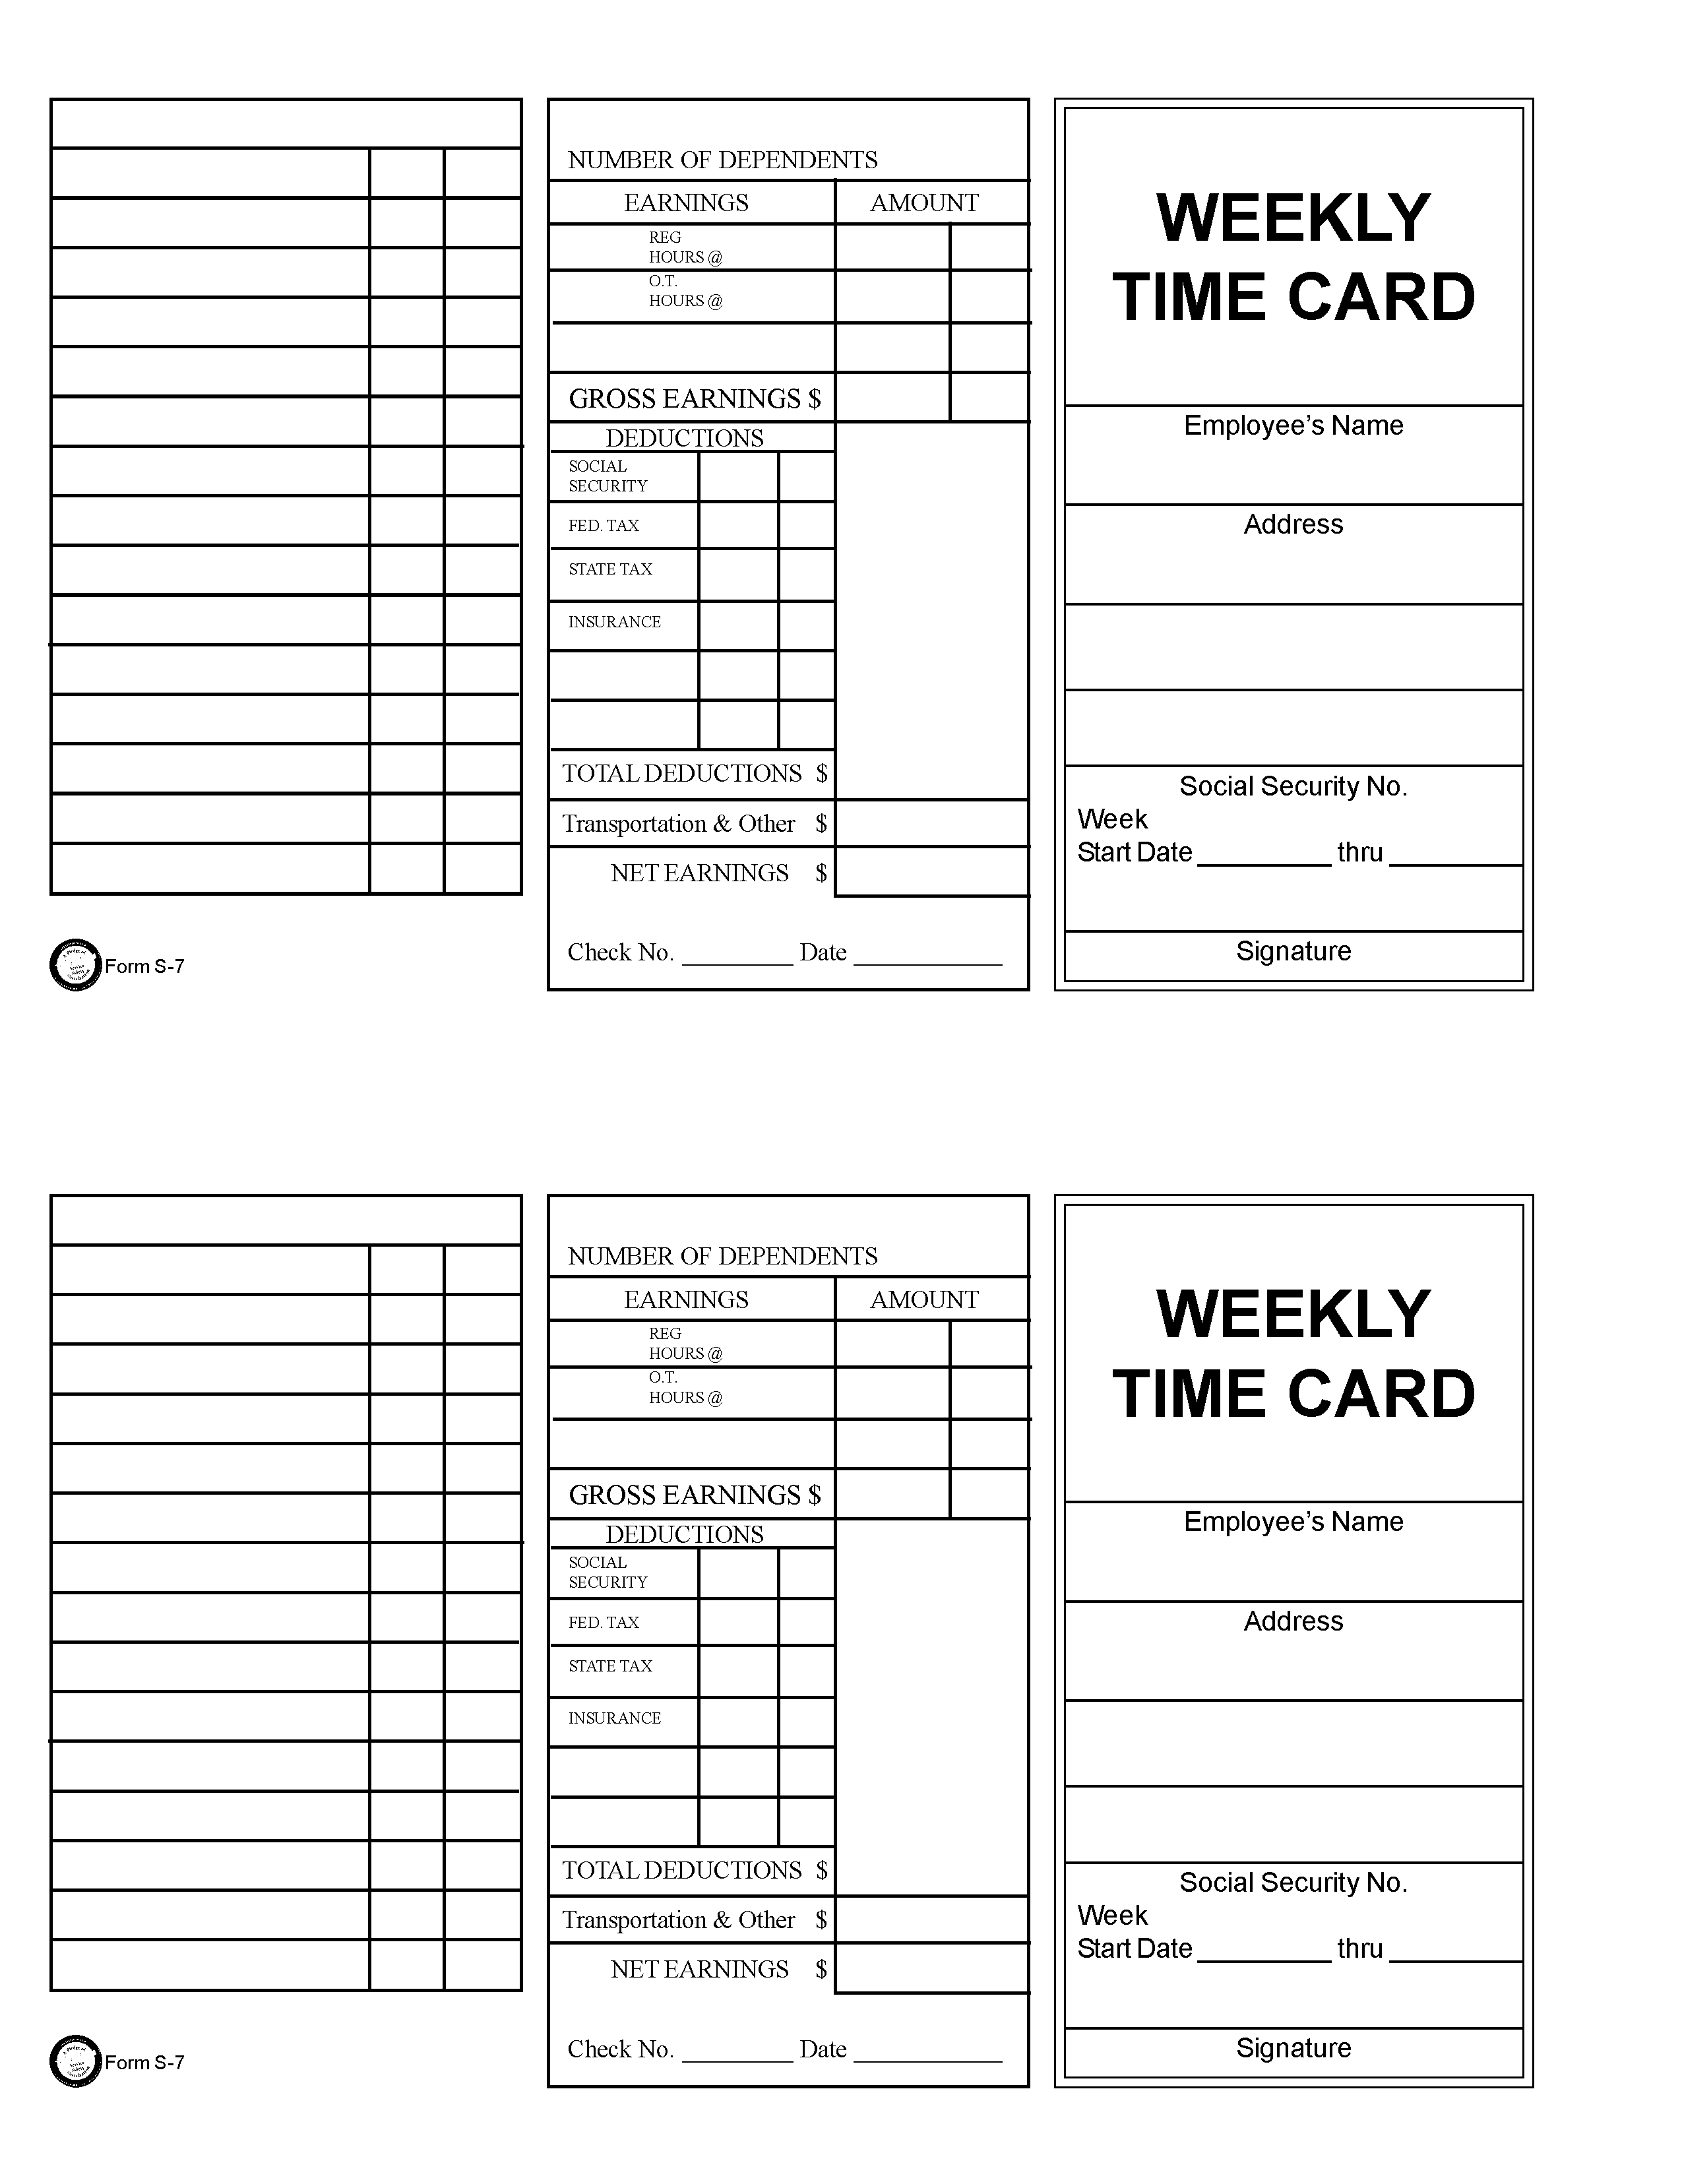 Weekly Time Card S-7